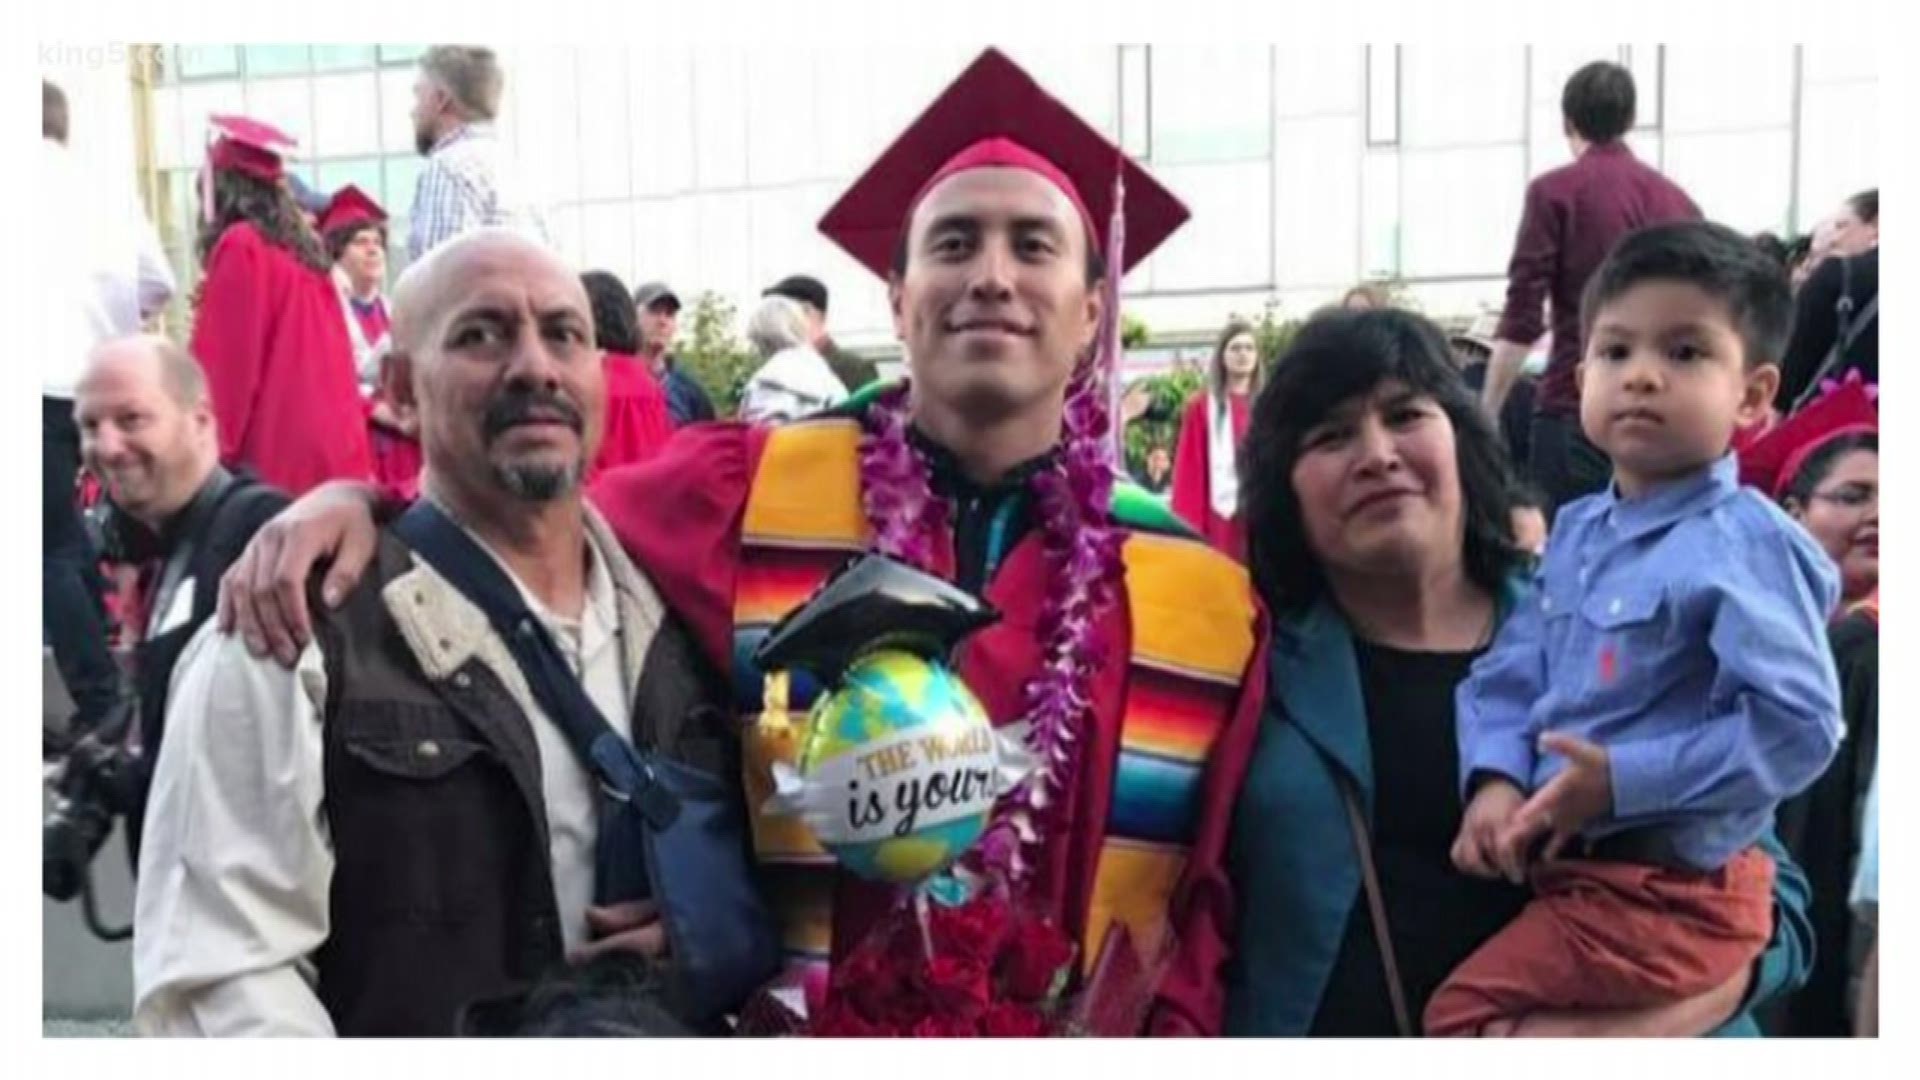 An Everett man and his parents detained and separated near the US/Mexican border, according to a family friend. KING 5's Chris Daniels reports.